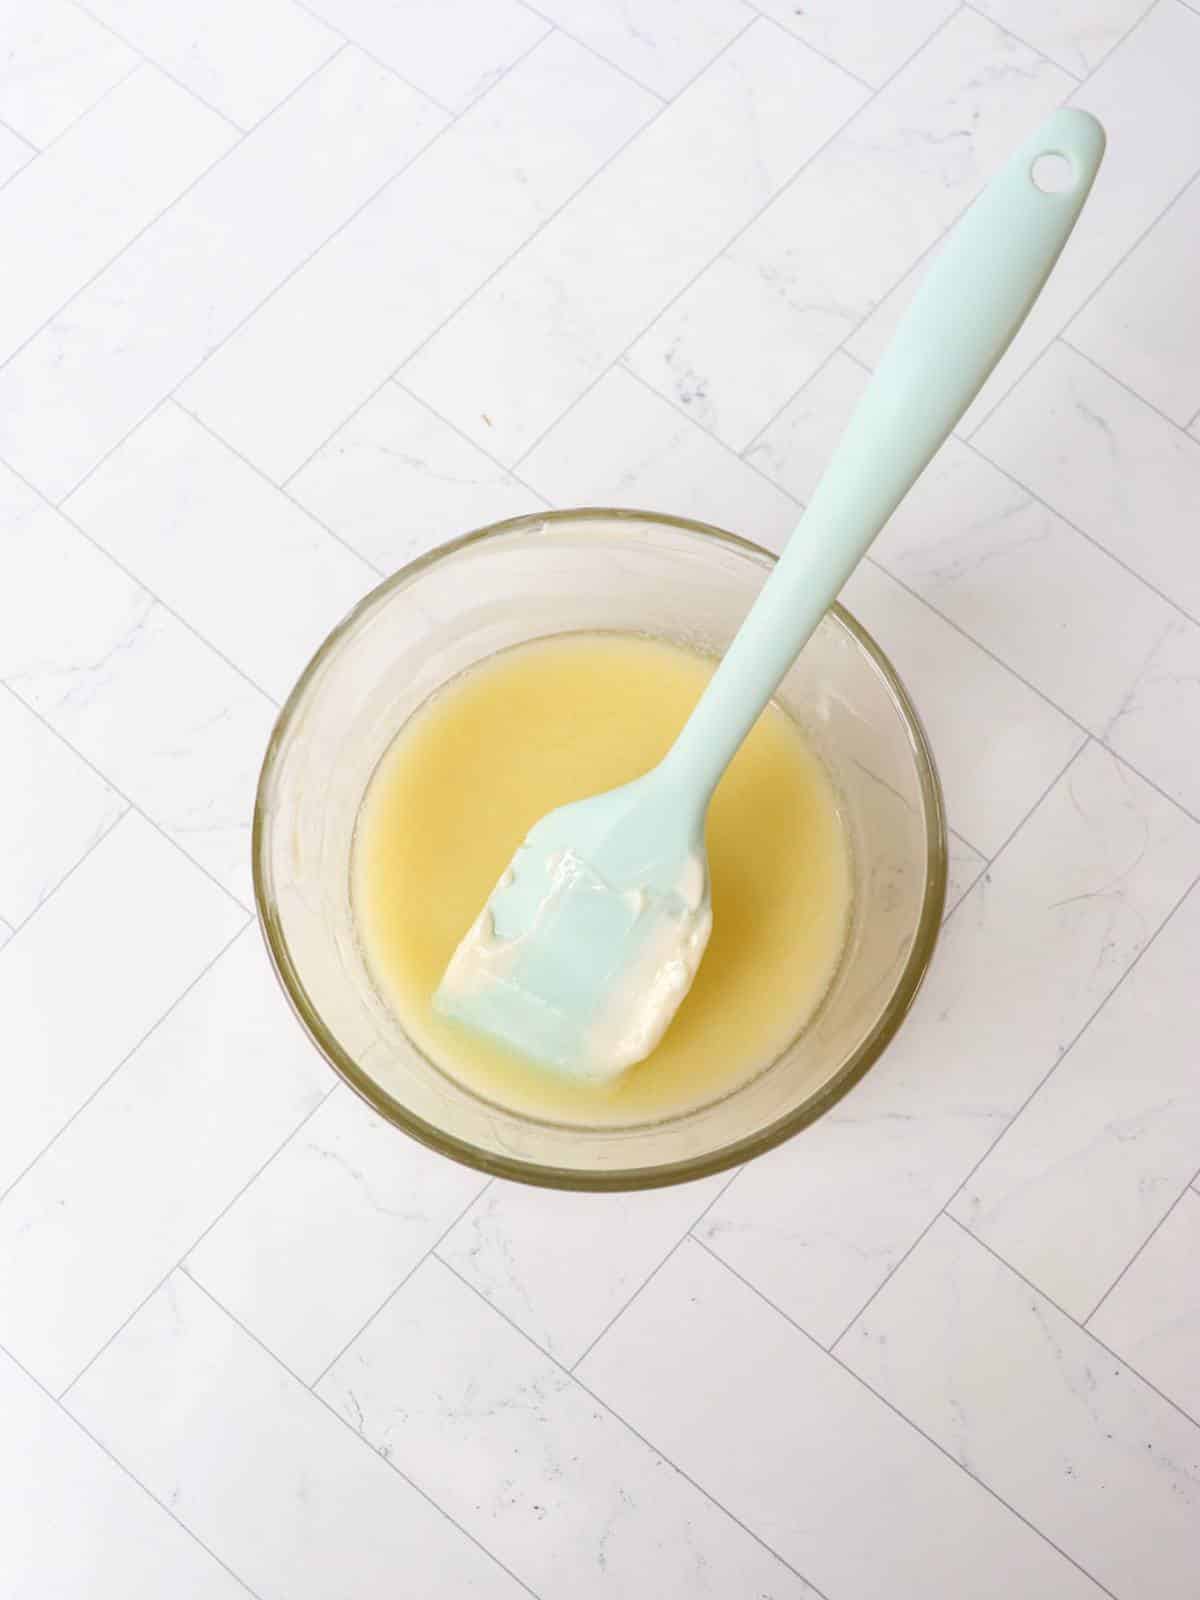 Melted vegan butter in a small glass bowl with a rubber spatula.